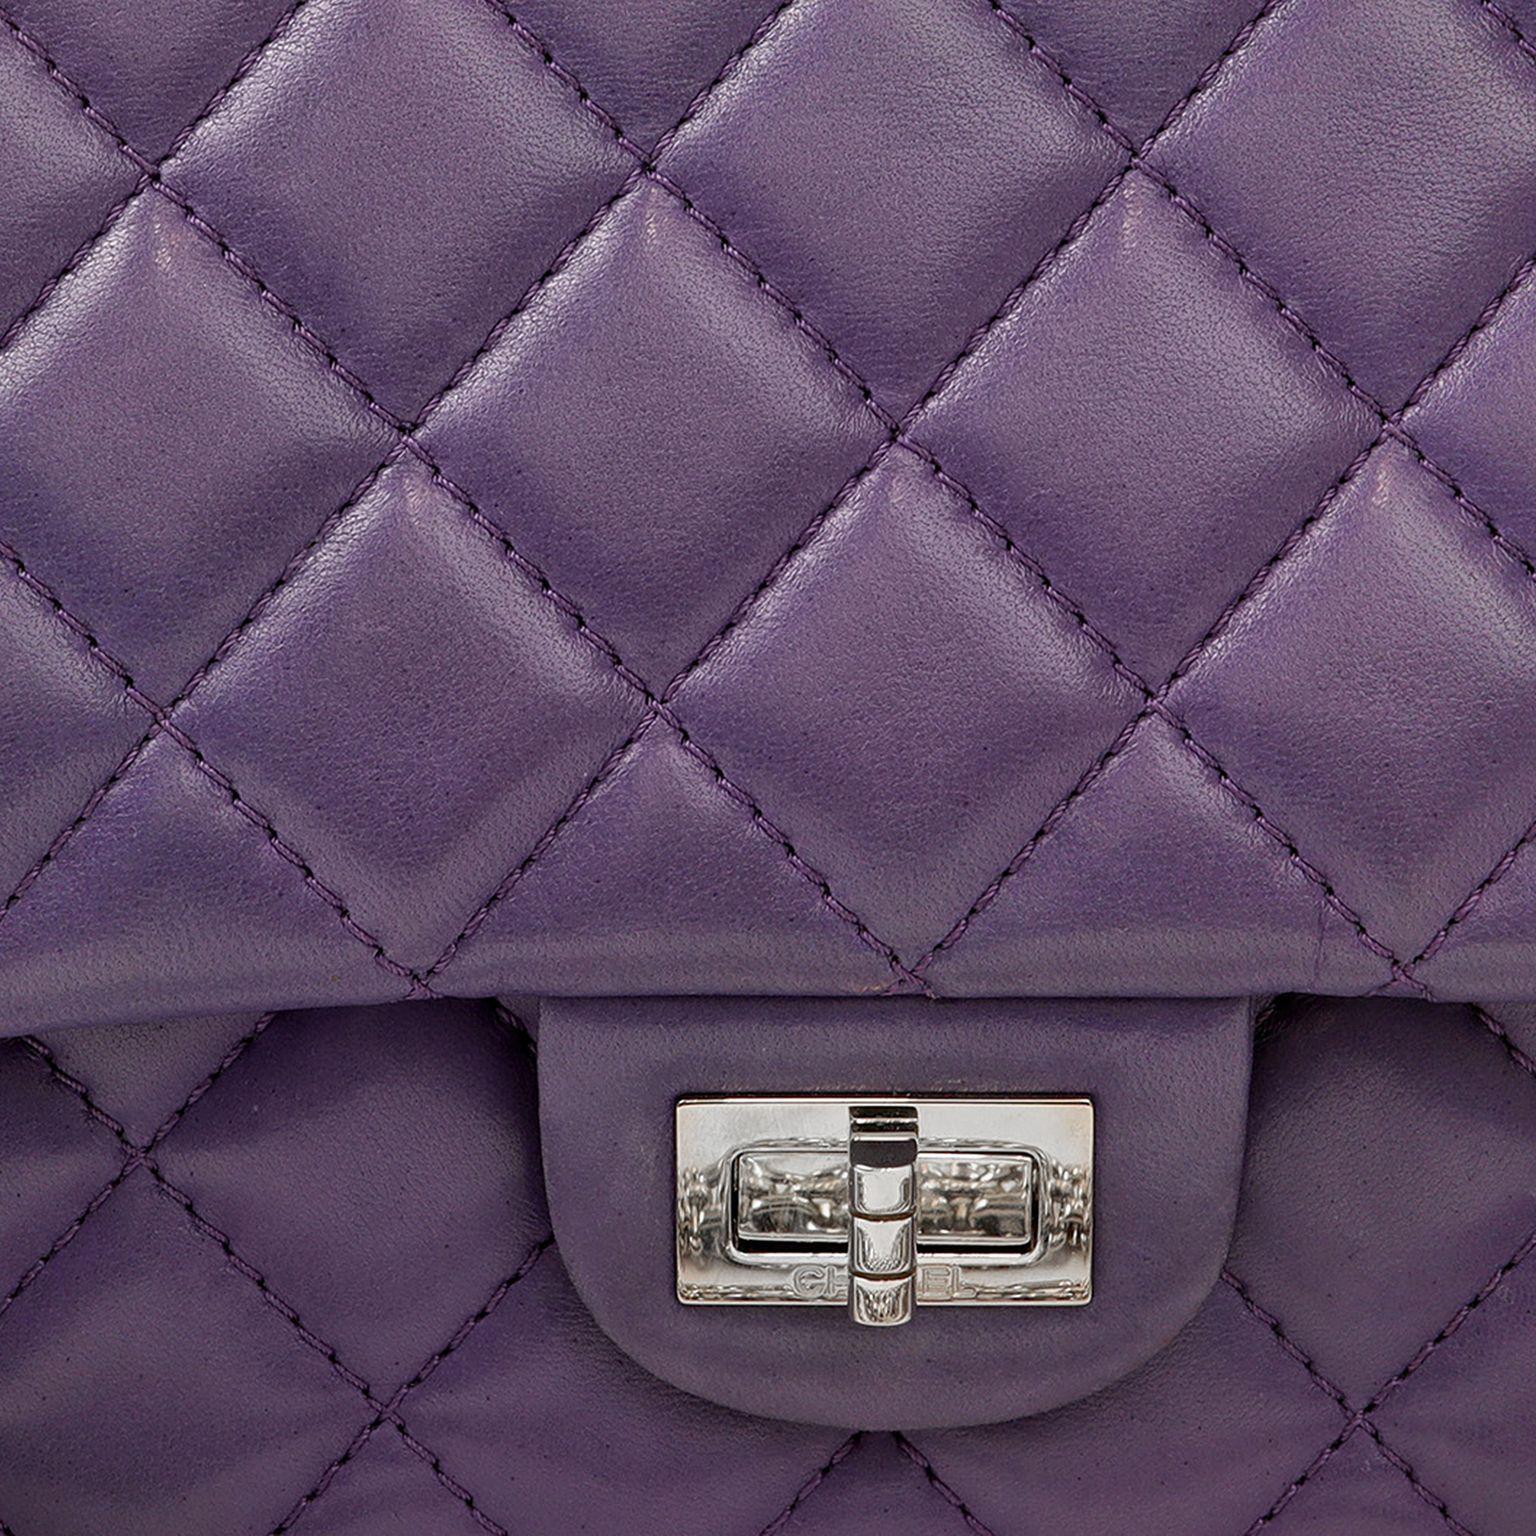 This authentic Chanel Purple Lambskin 2.55 Medium Classic Flap is perfectly pristine.  Deep purple lambskin is quilted in signature Chanel diamond pattern.  Silver mademoiselle twist lock with Bijoux chain strap.  Dust bag included. 

PBF 13907
